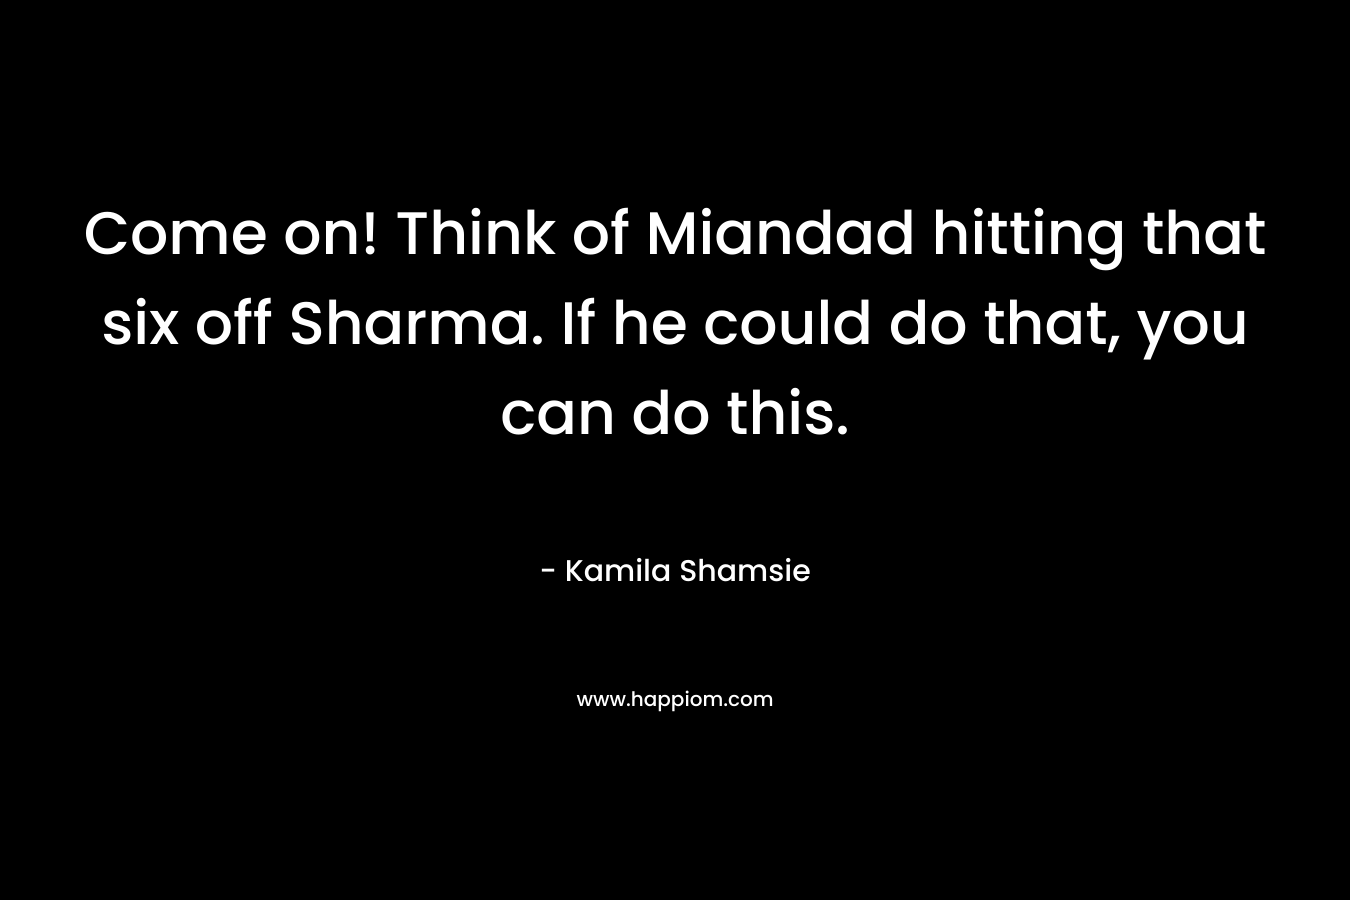 Come on! Think of Miandad hitting that six off Sharma. If he could do that, you can do this.